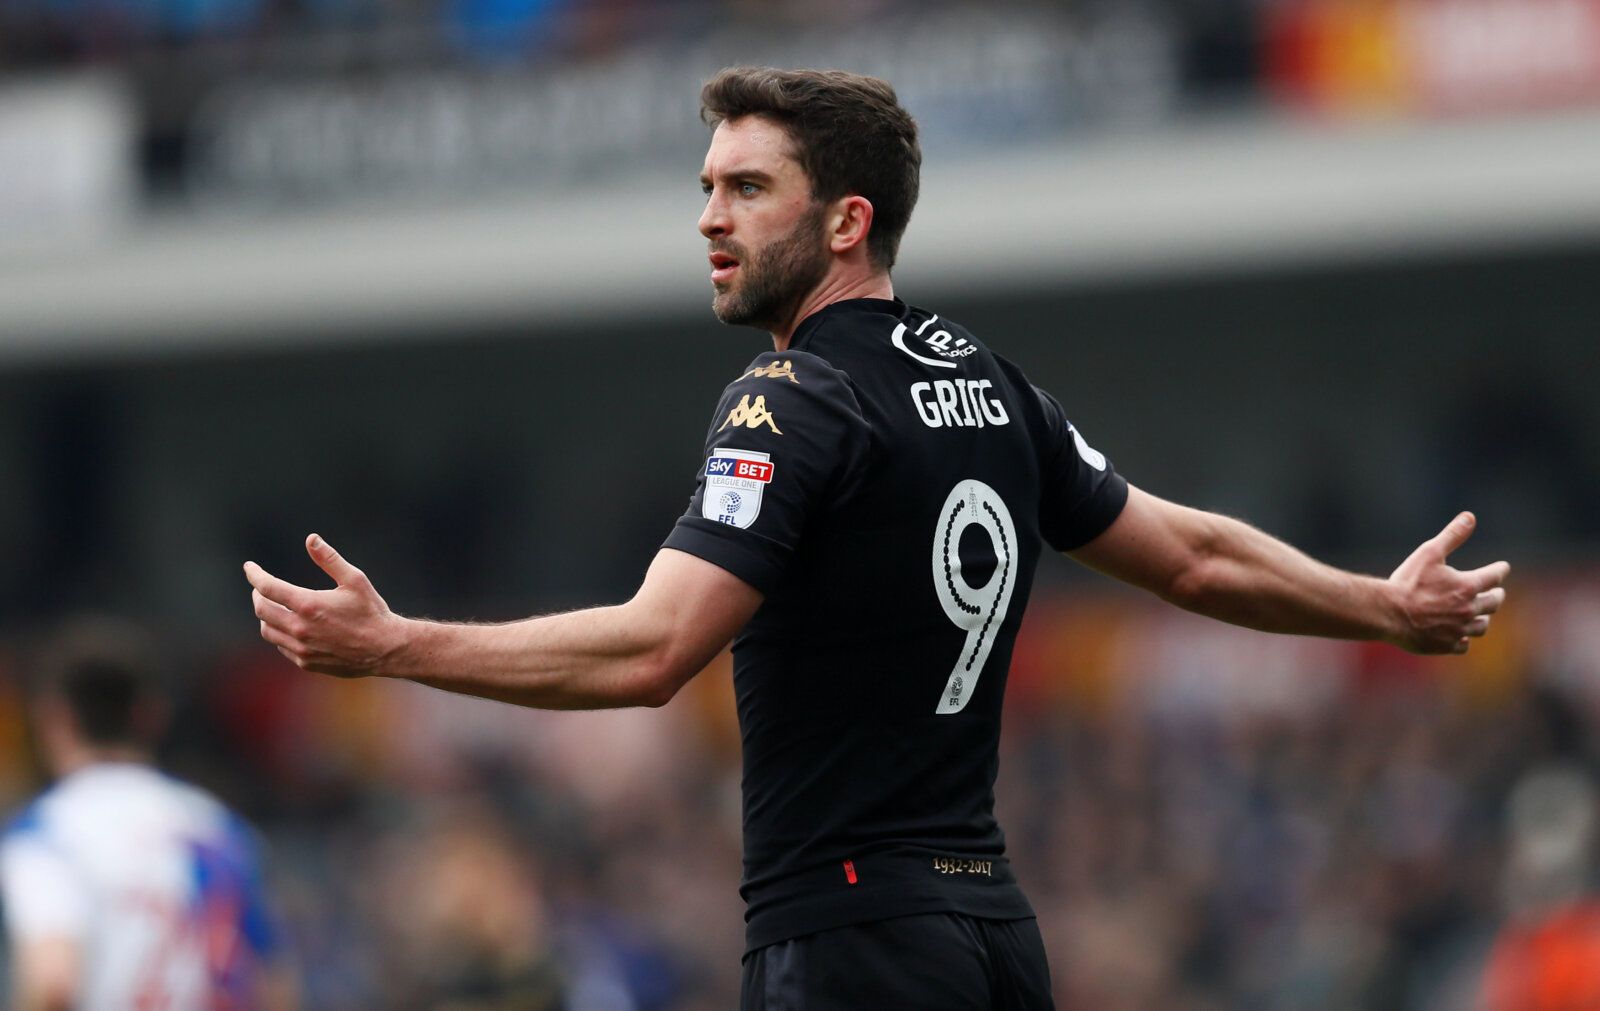 Soccer Football - League One - Blackburn Rovers vs Wigan Athletic - Ewood Park, Blackburn, Britain - March 4, 2018  Wigan Athletic's Will Grigg reacts  Action Images/Jason Cairnduff  EDITORIAL USE ONLY. No use with unauthorized audio, video, data, fixture lists, club/league logos or 